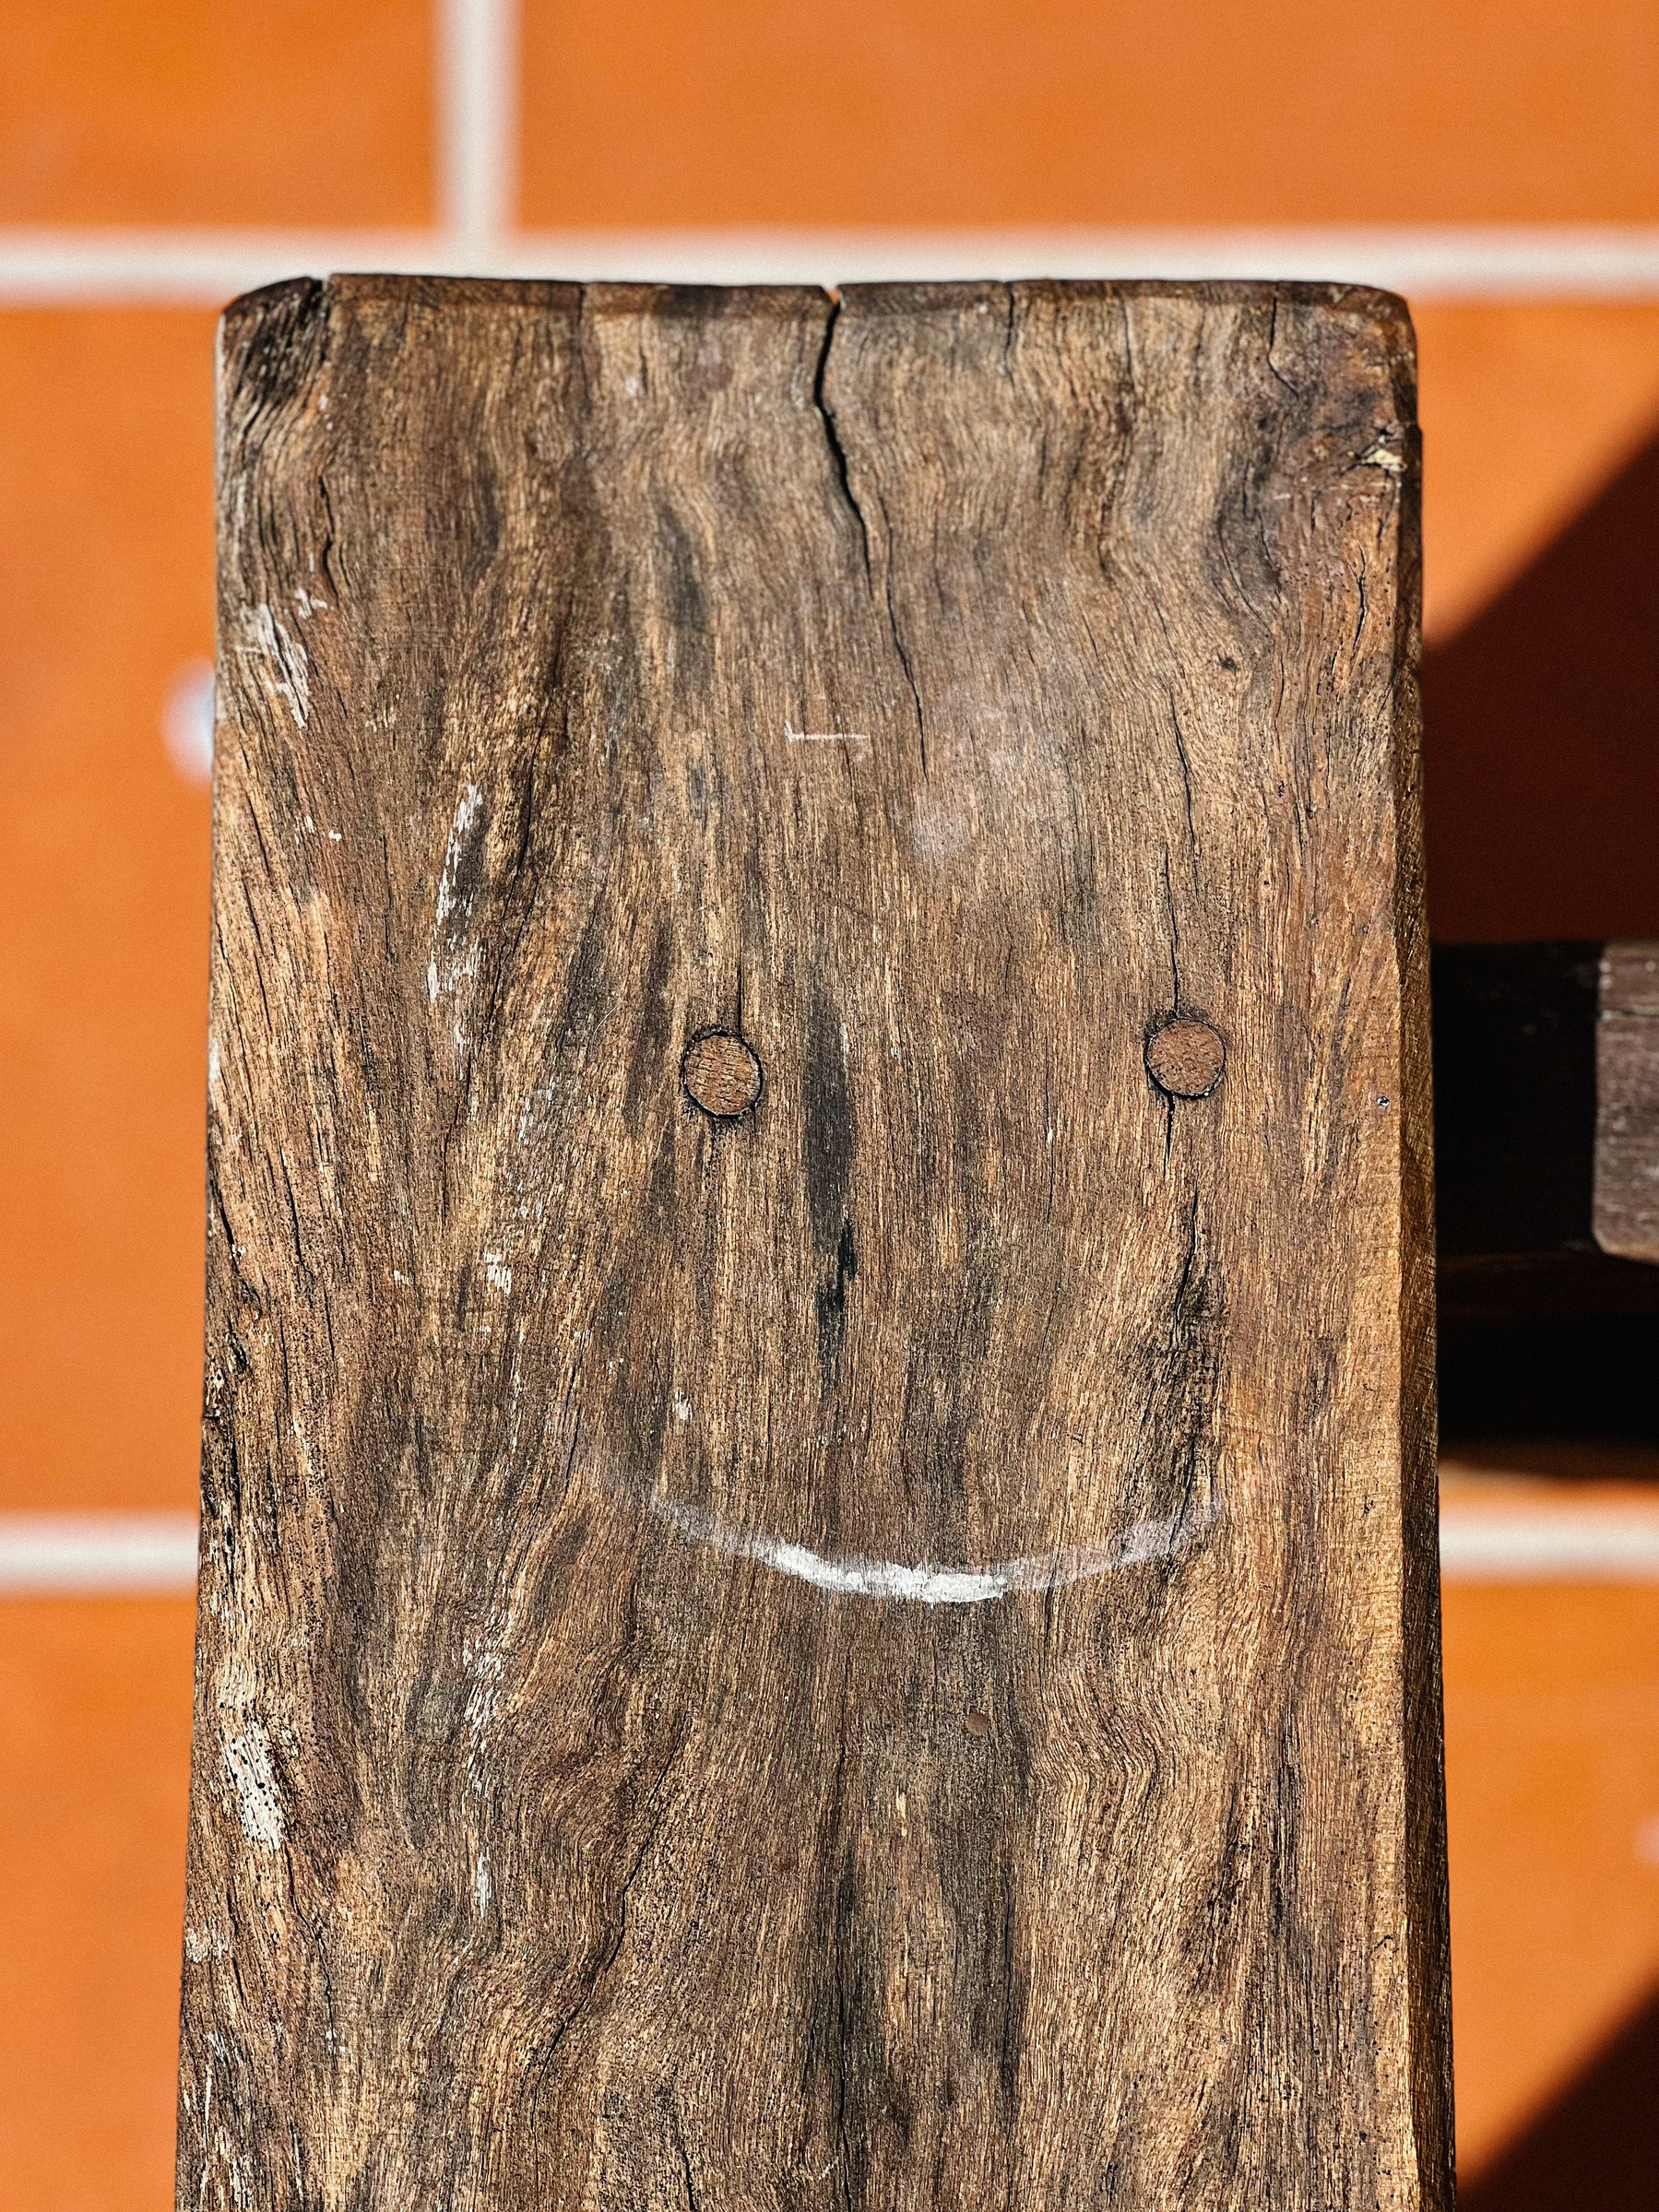 A smiley face on a piece of wood. 